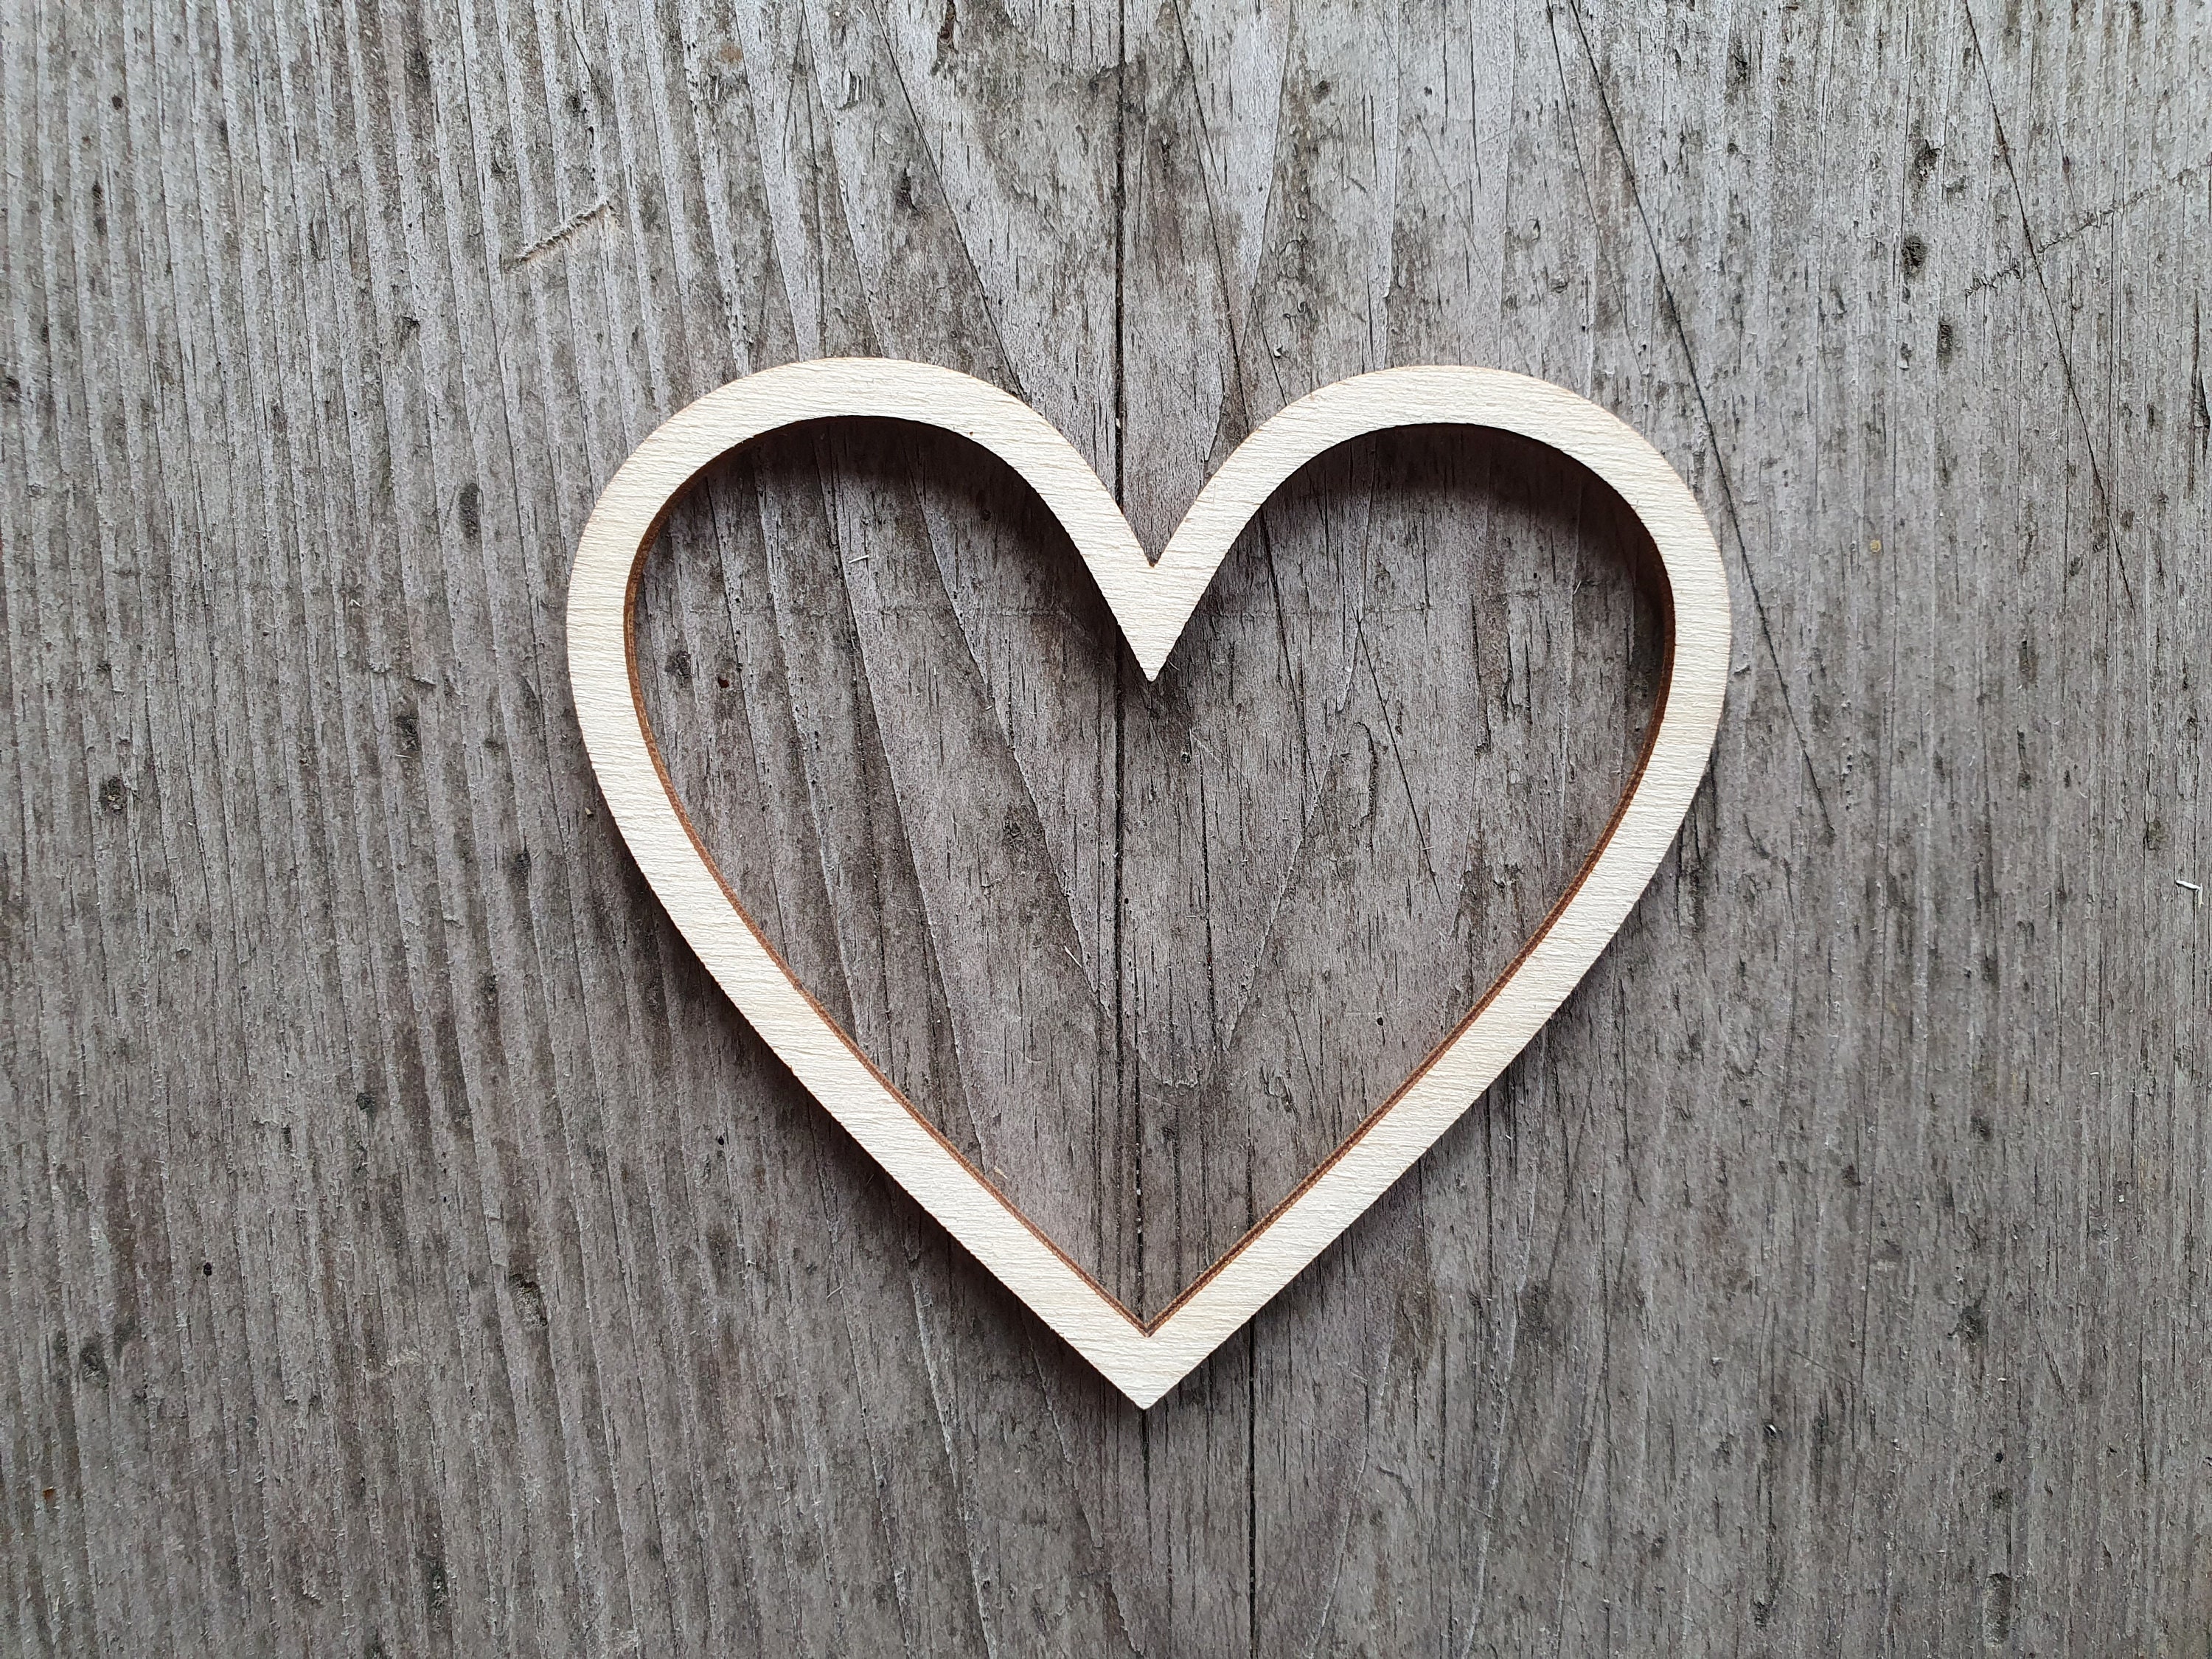 100 Love 1 Wood Hearts, Wood Confetti Engraved Love Hearts Rustic Wedding  Decor Table Decorations Small Wooden Hearts 